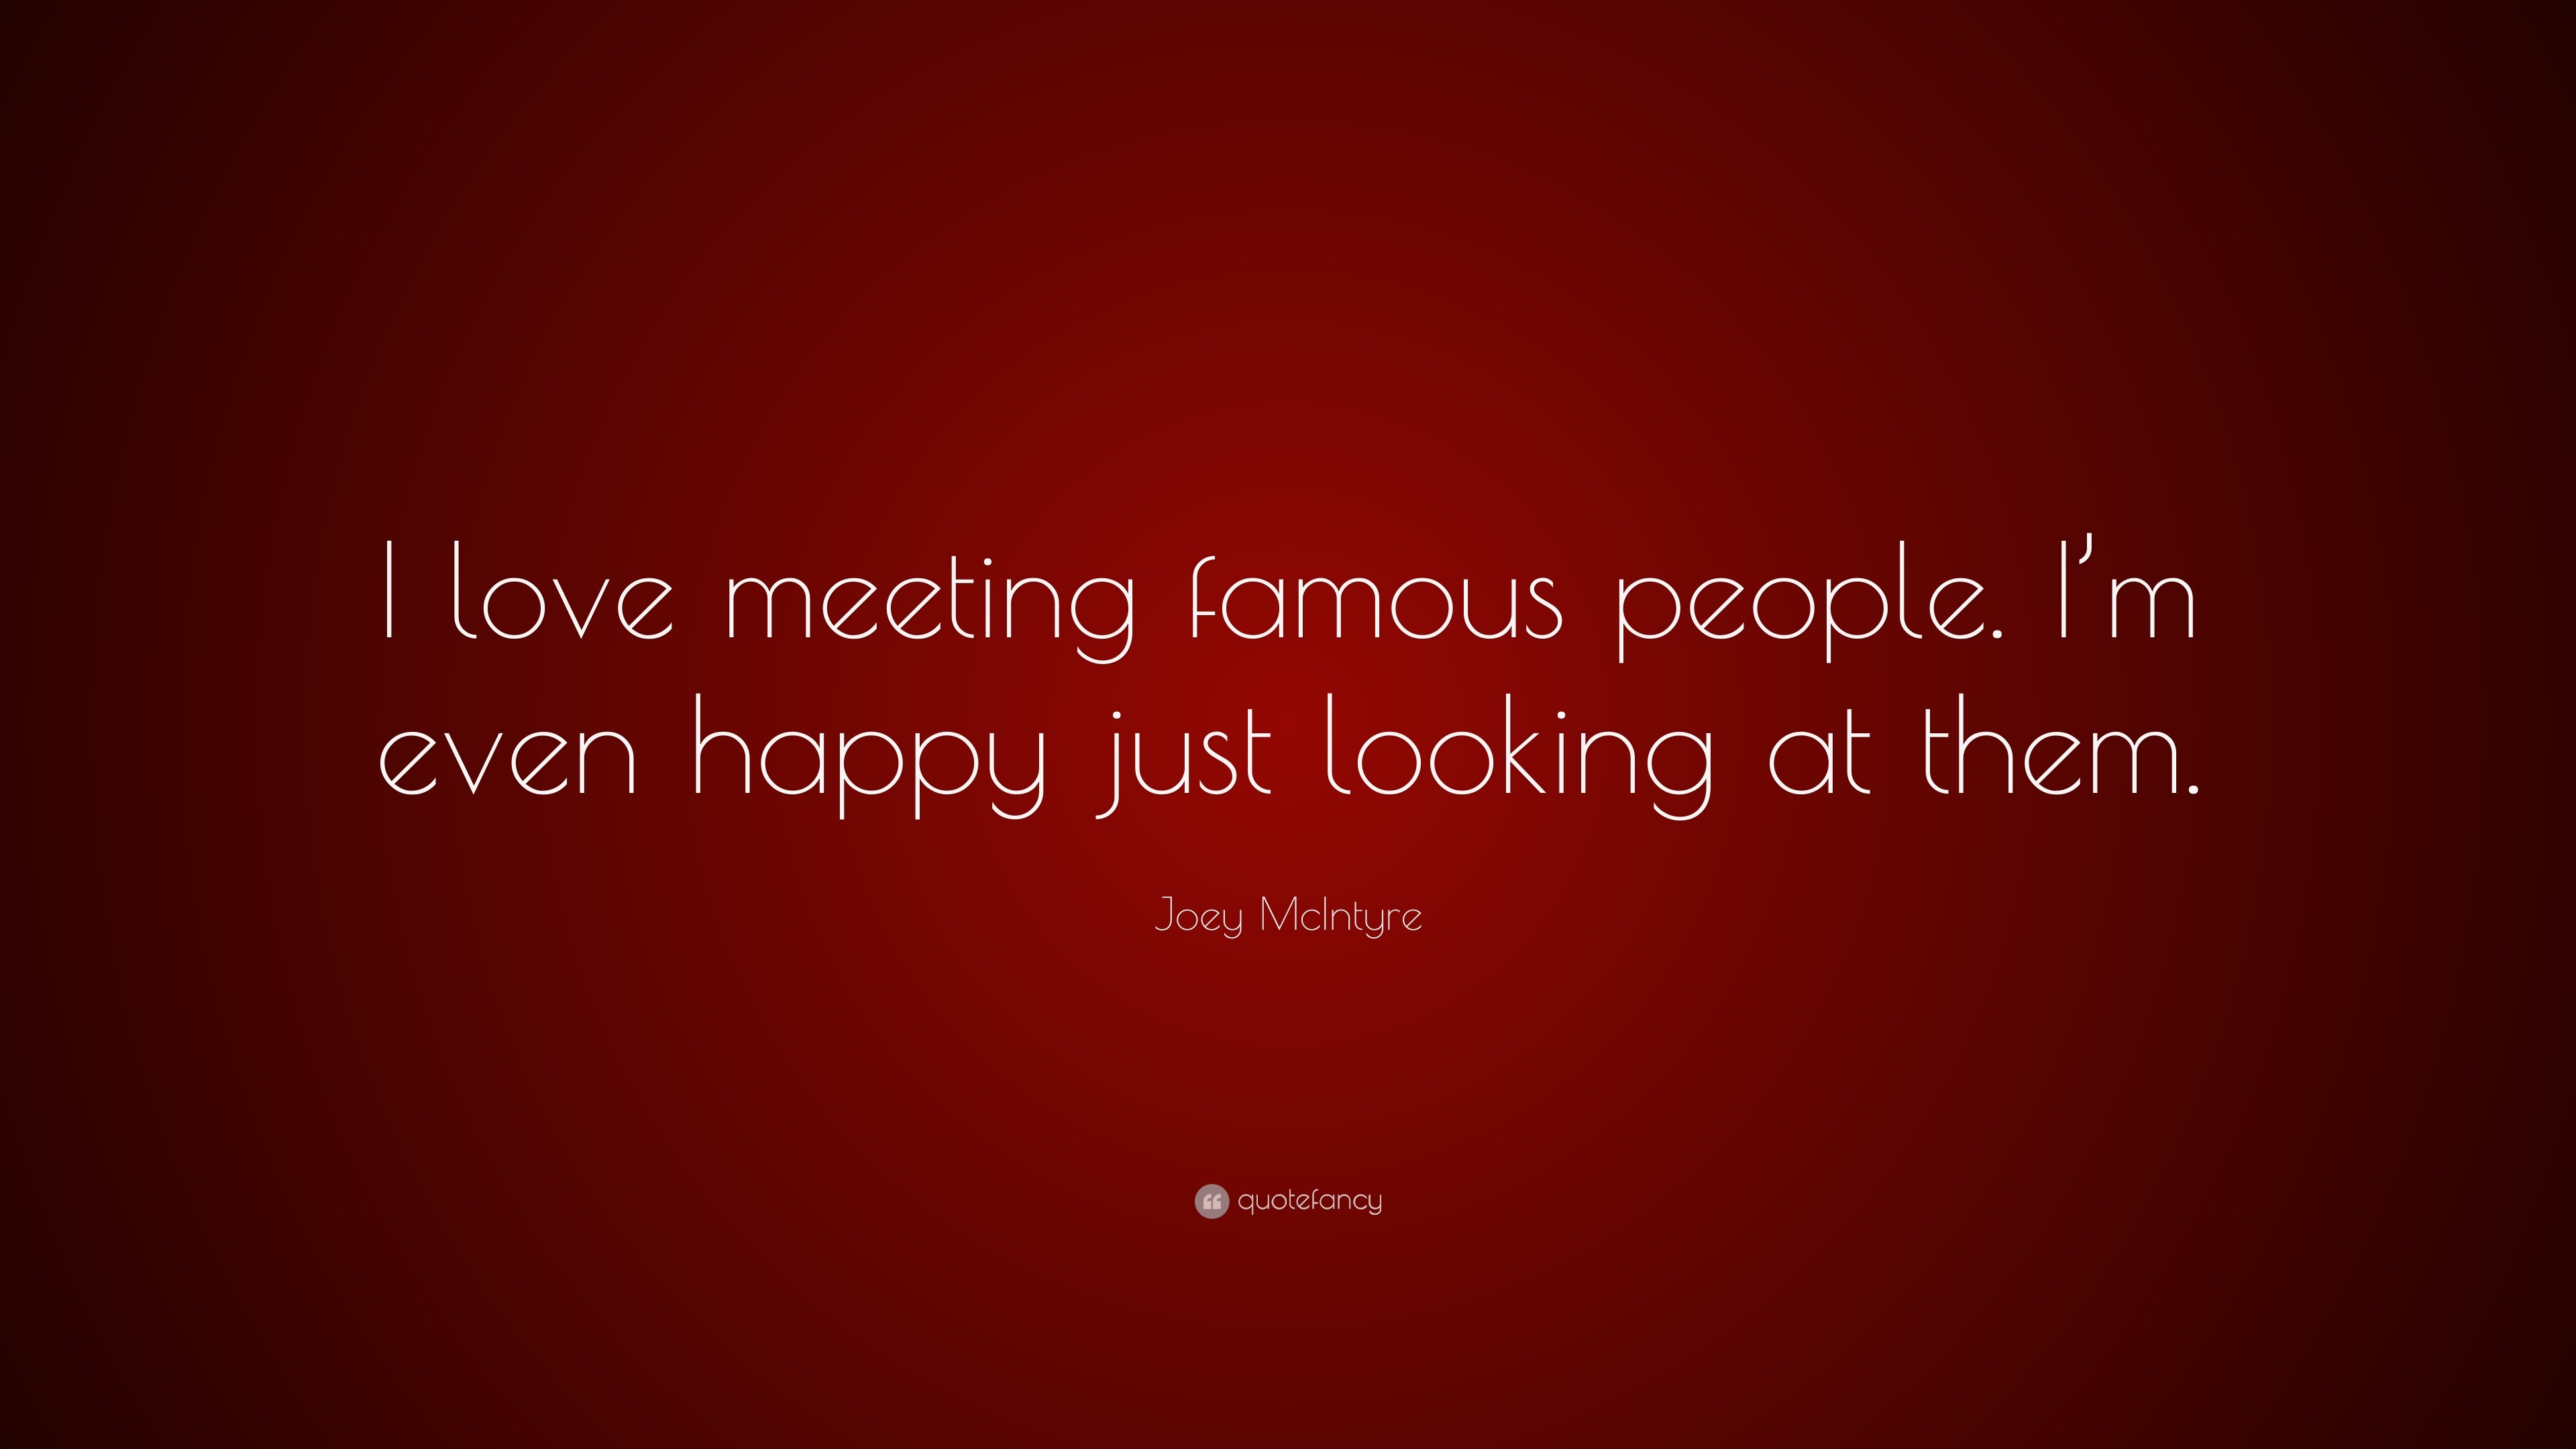 Joey McIntyre Quote “I love meeting famous people I m even happy